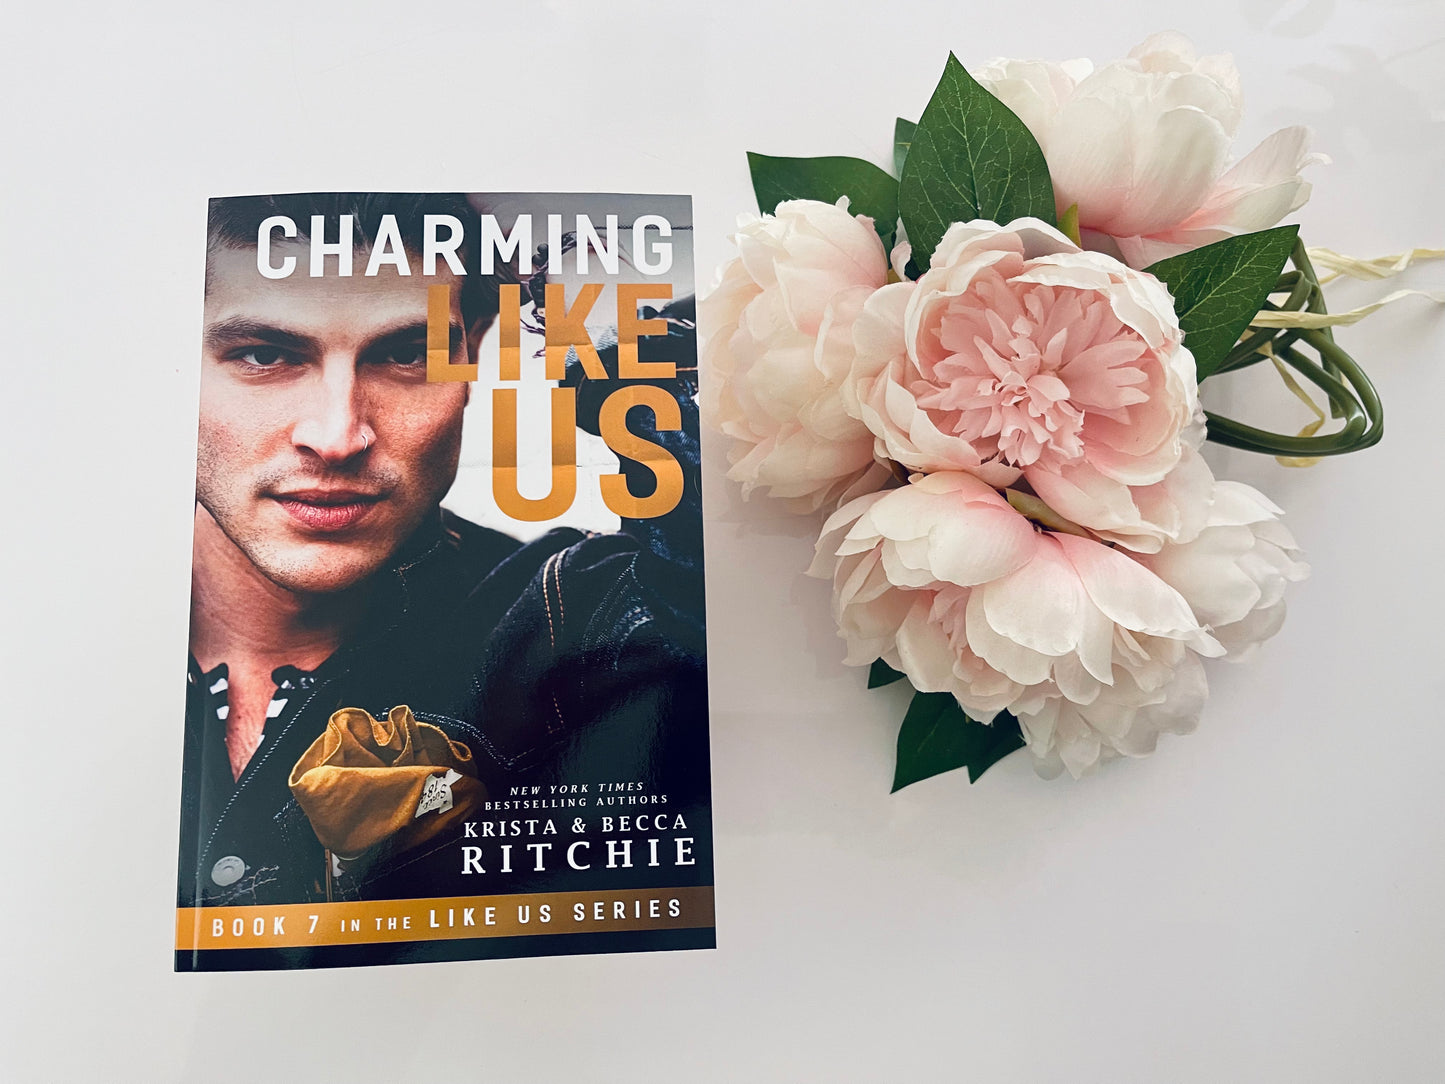 Charming Like Us by Krista & Becca Ritchie (Like Us book 7)